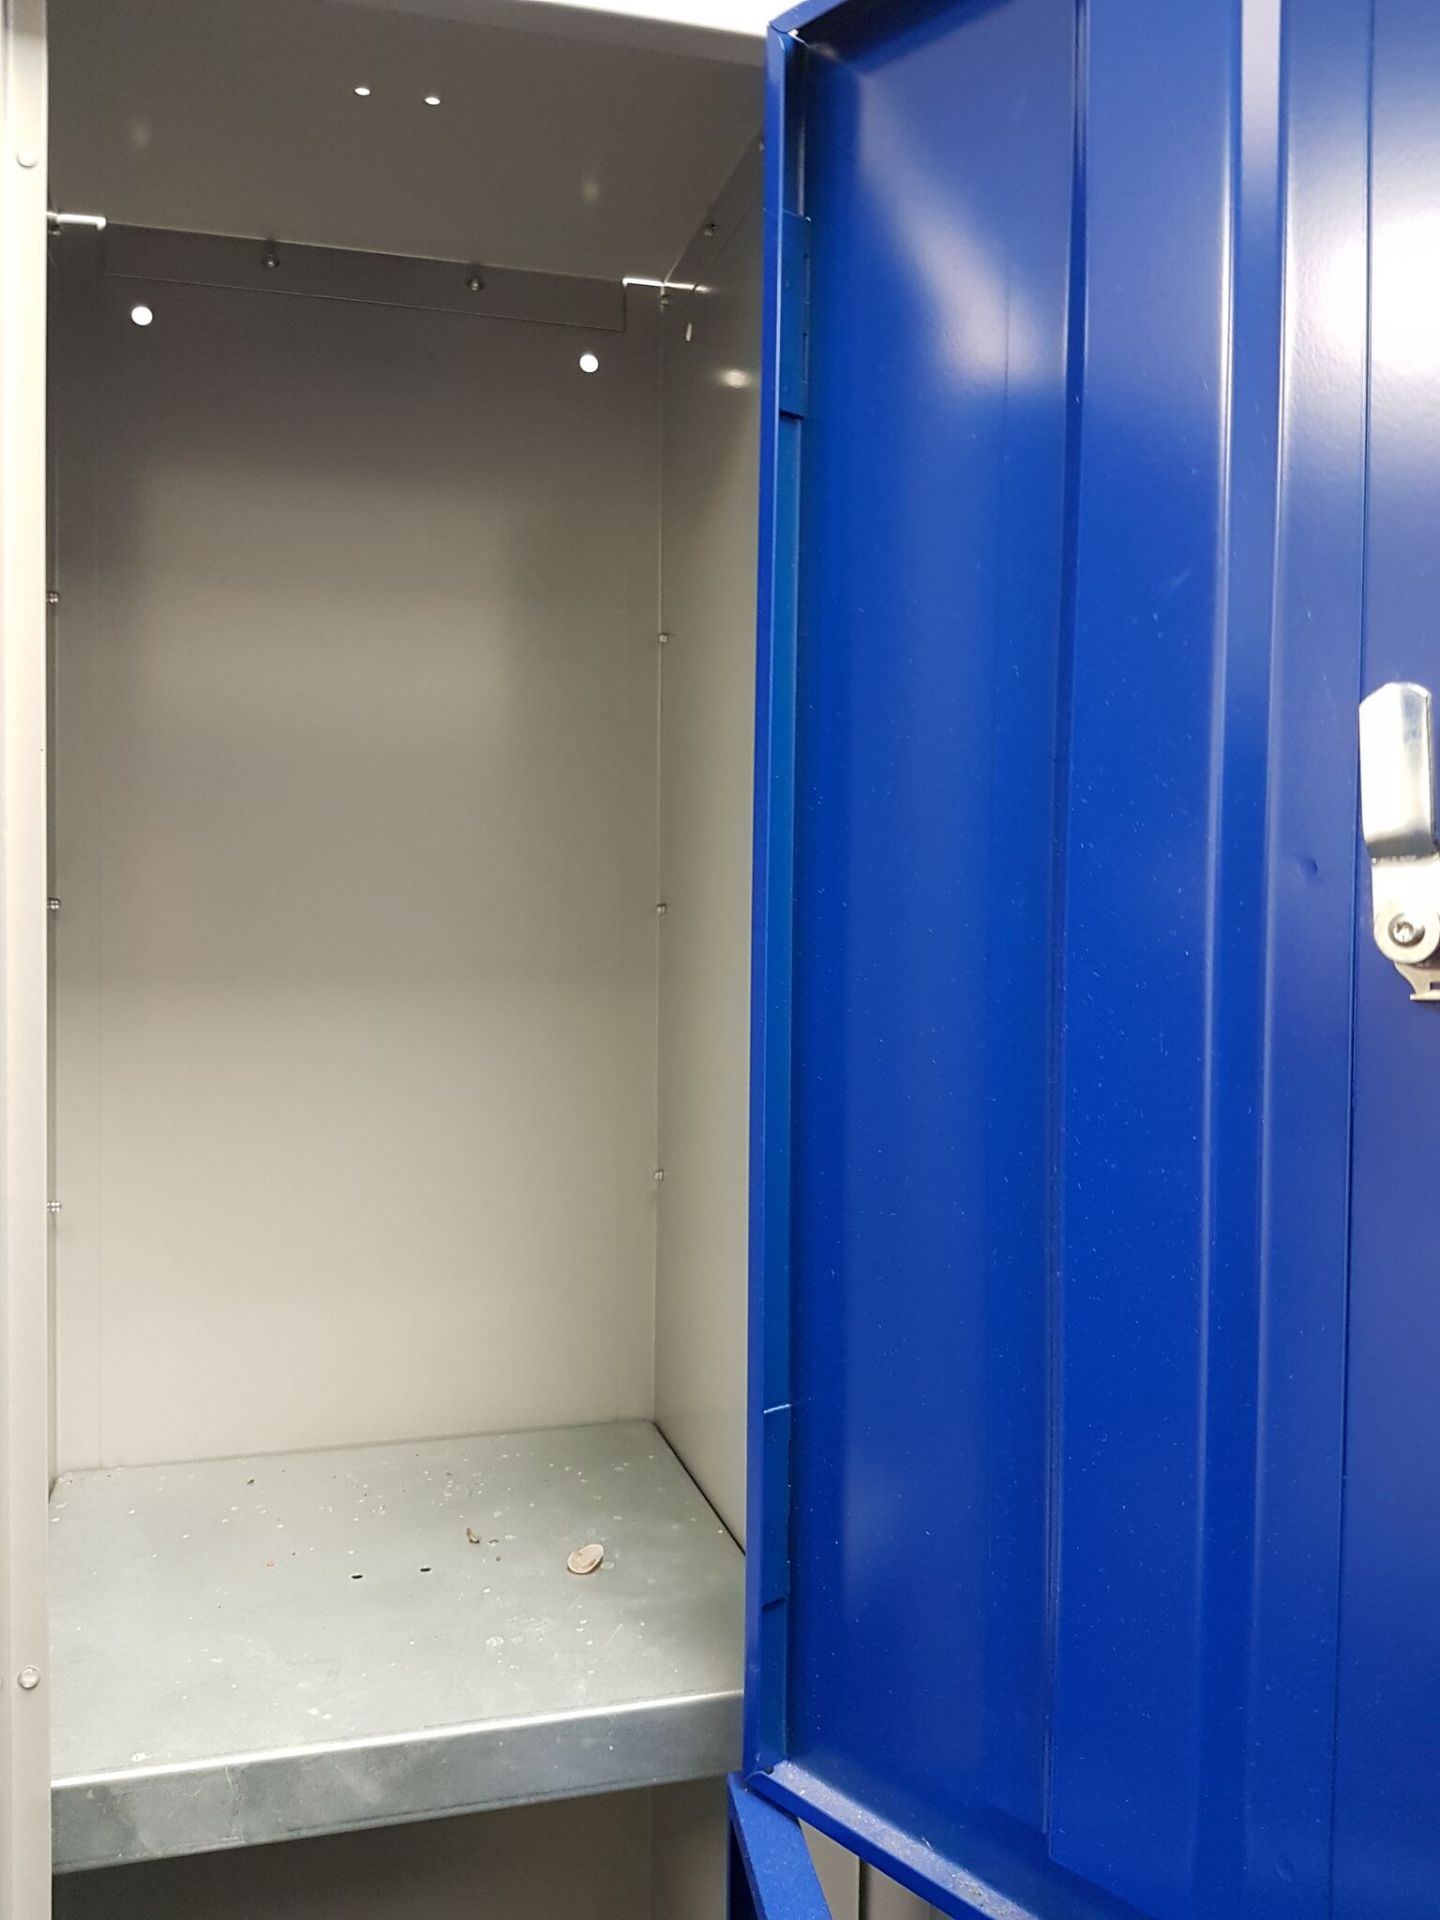 2 x Elite 3 Door Staff Clothes Lockers - Features Padlock Fittings, Welded and Riveted Steel - Image 5 of 5